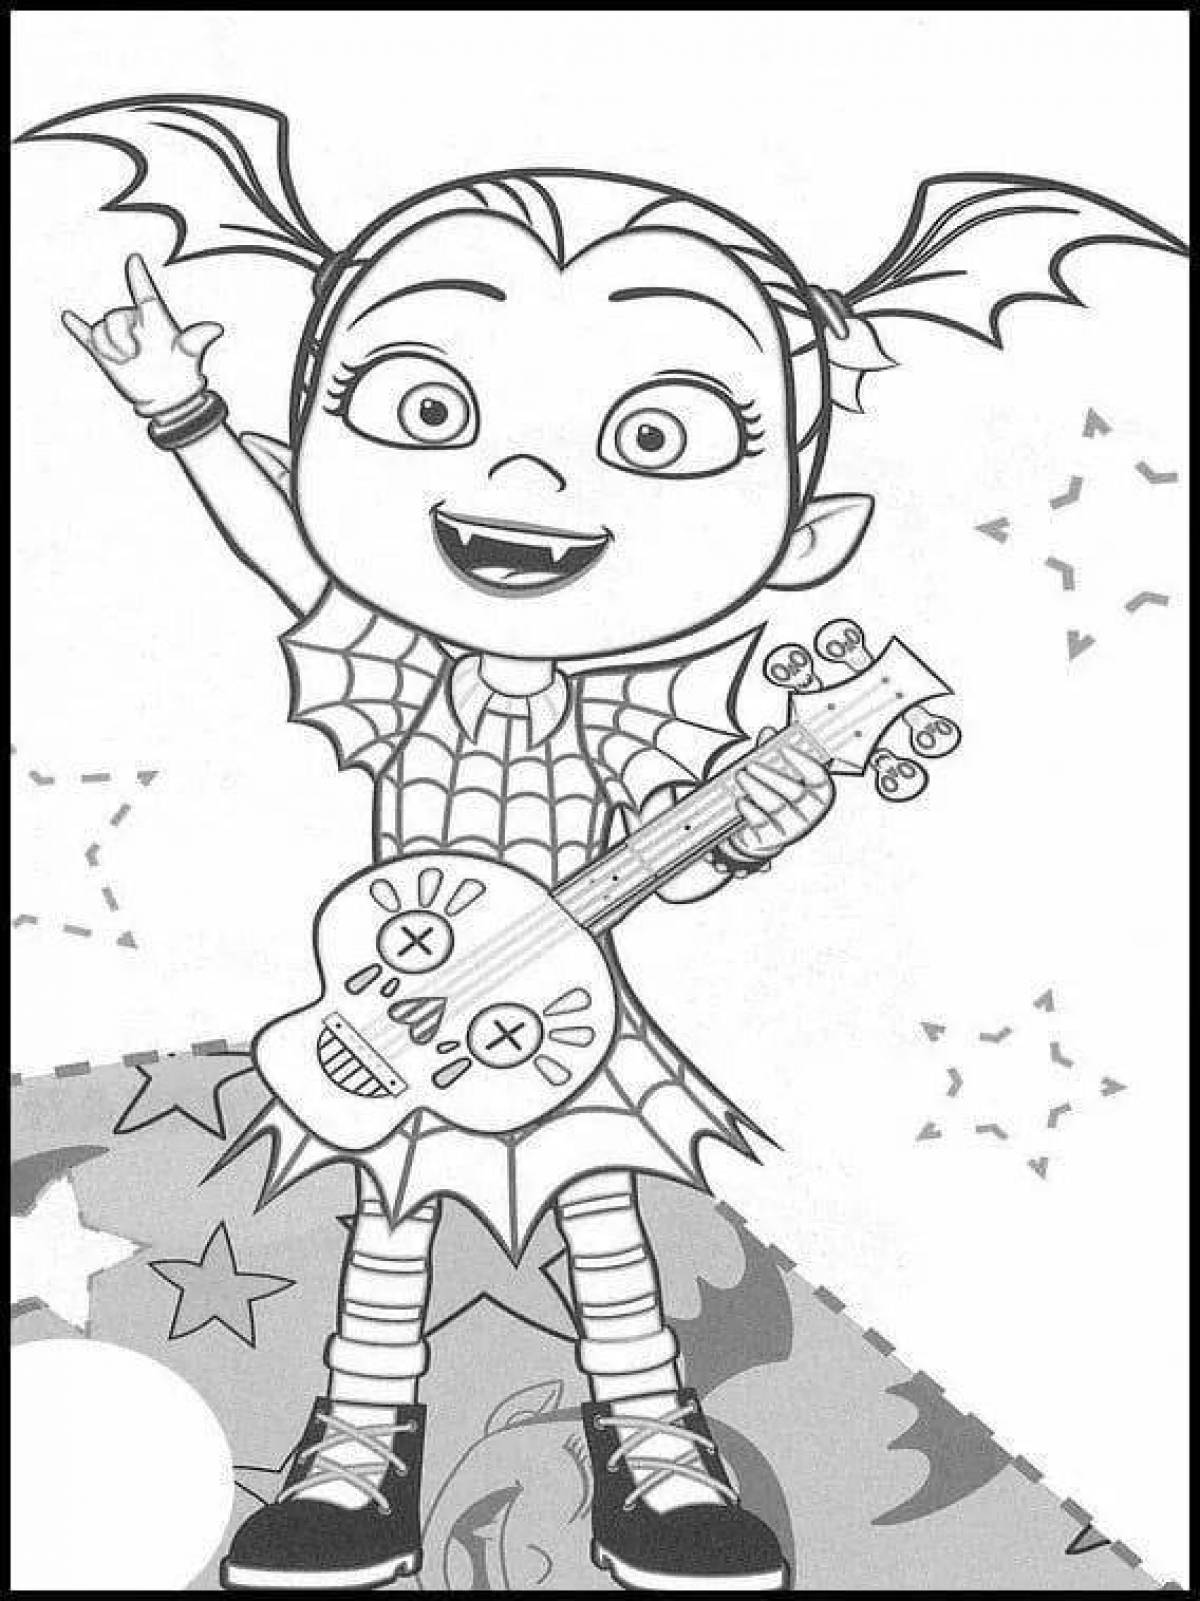 Fun amazing vee coloring page